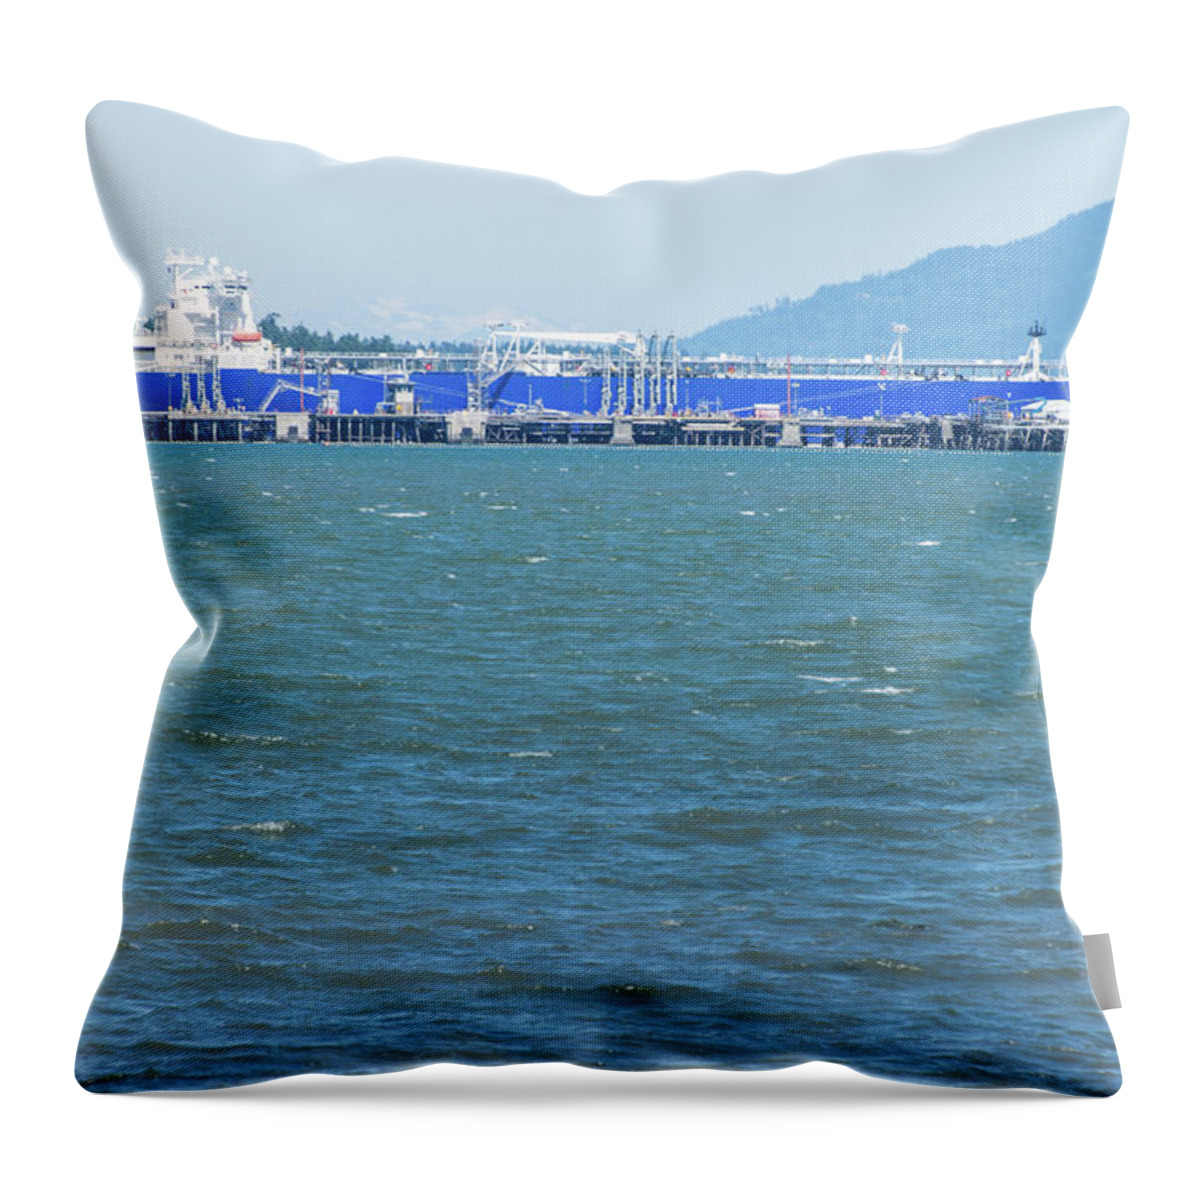 Blue Oil Tanker Throw Pillow featuring the photograph Blue Oil Tanker by Tom Cochran